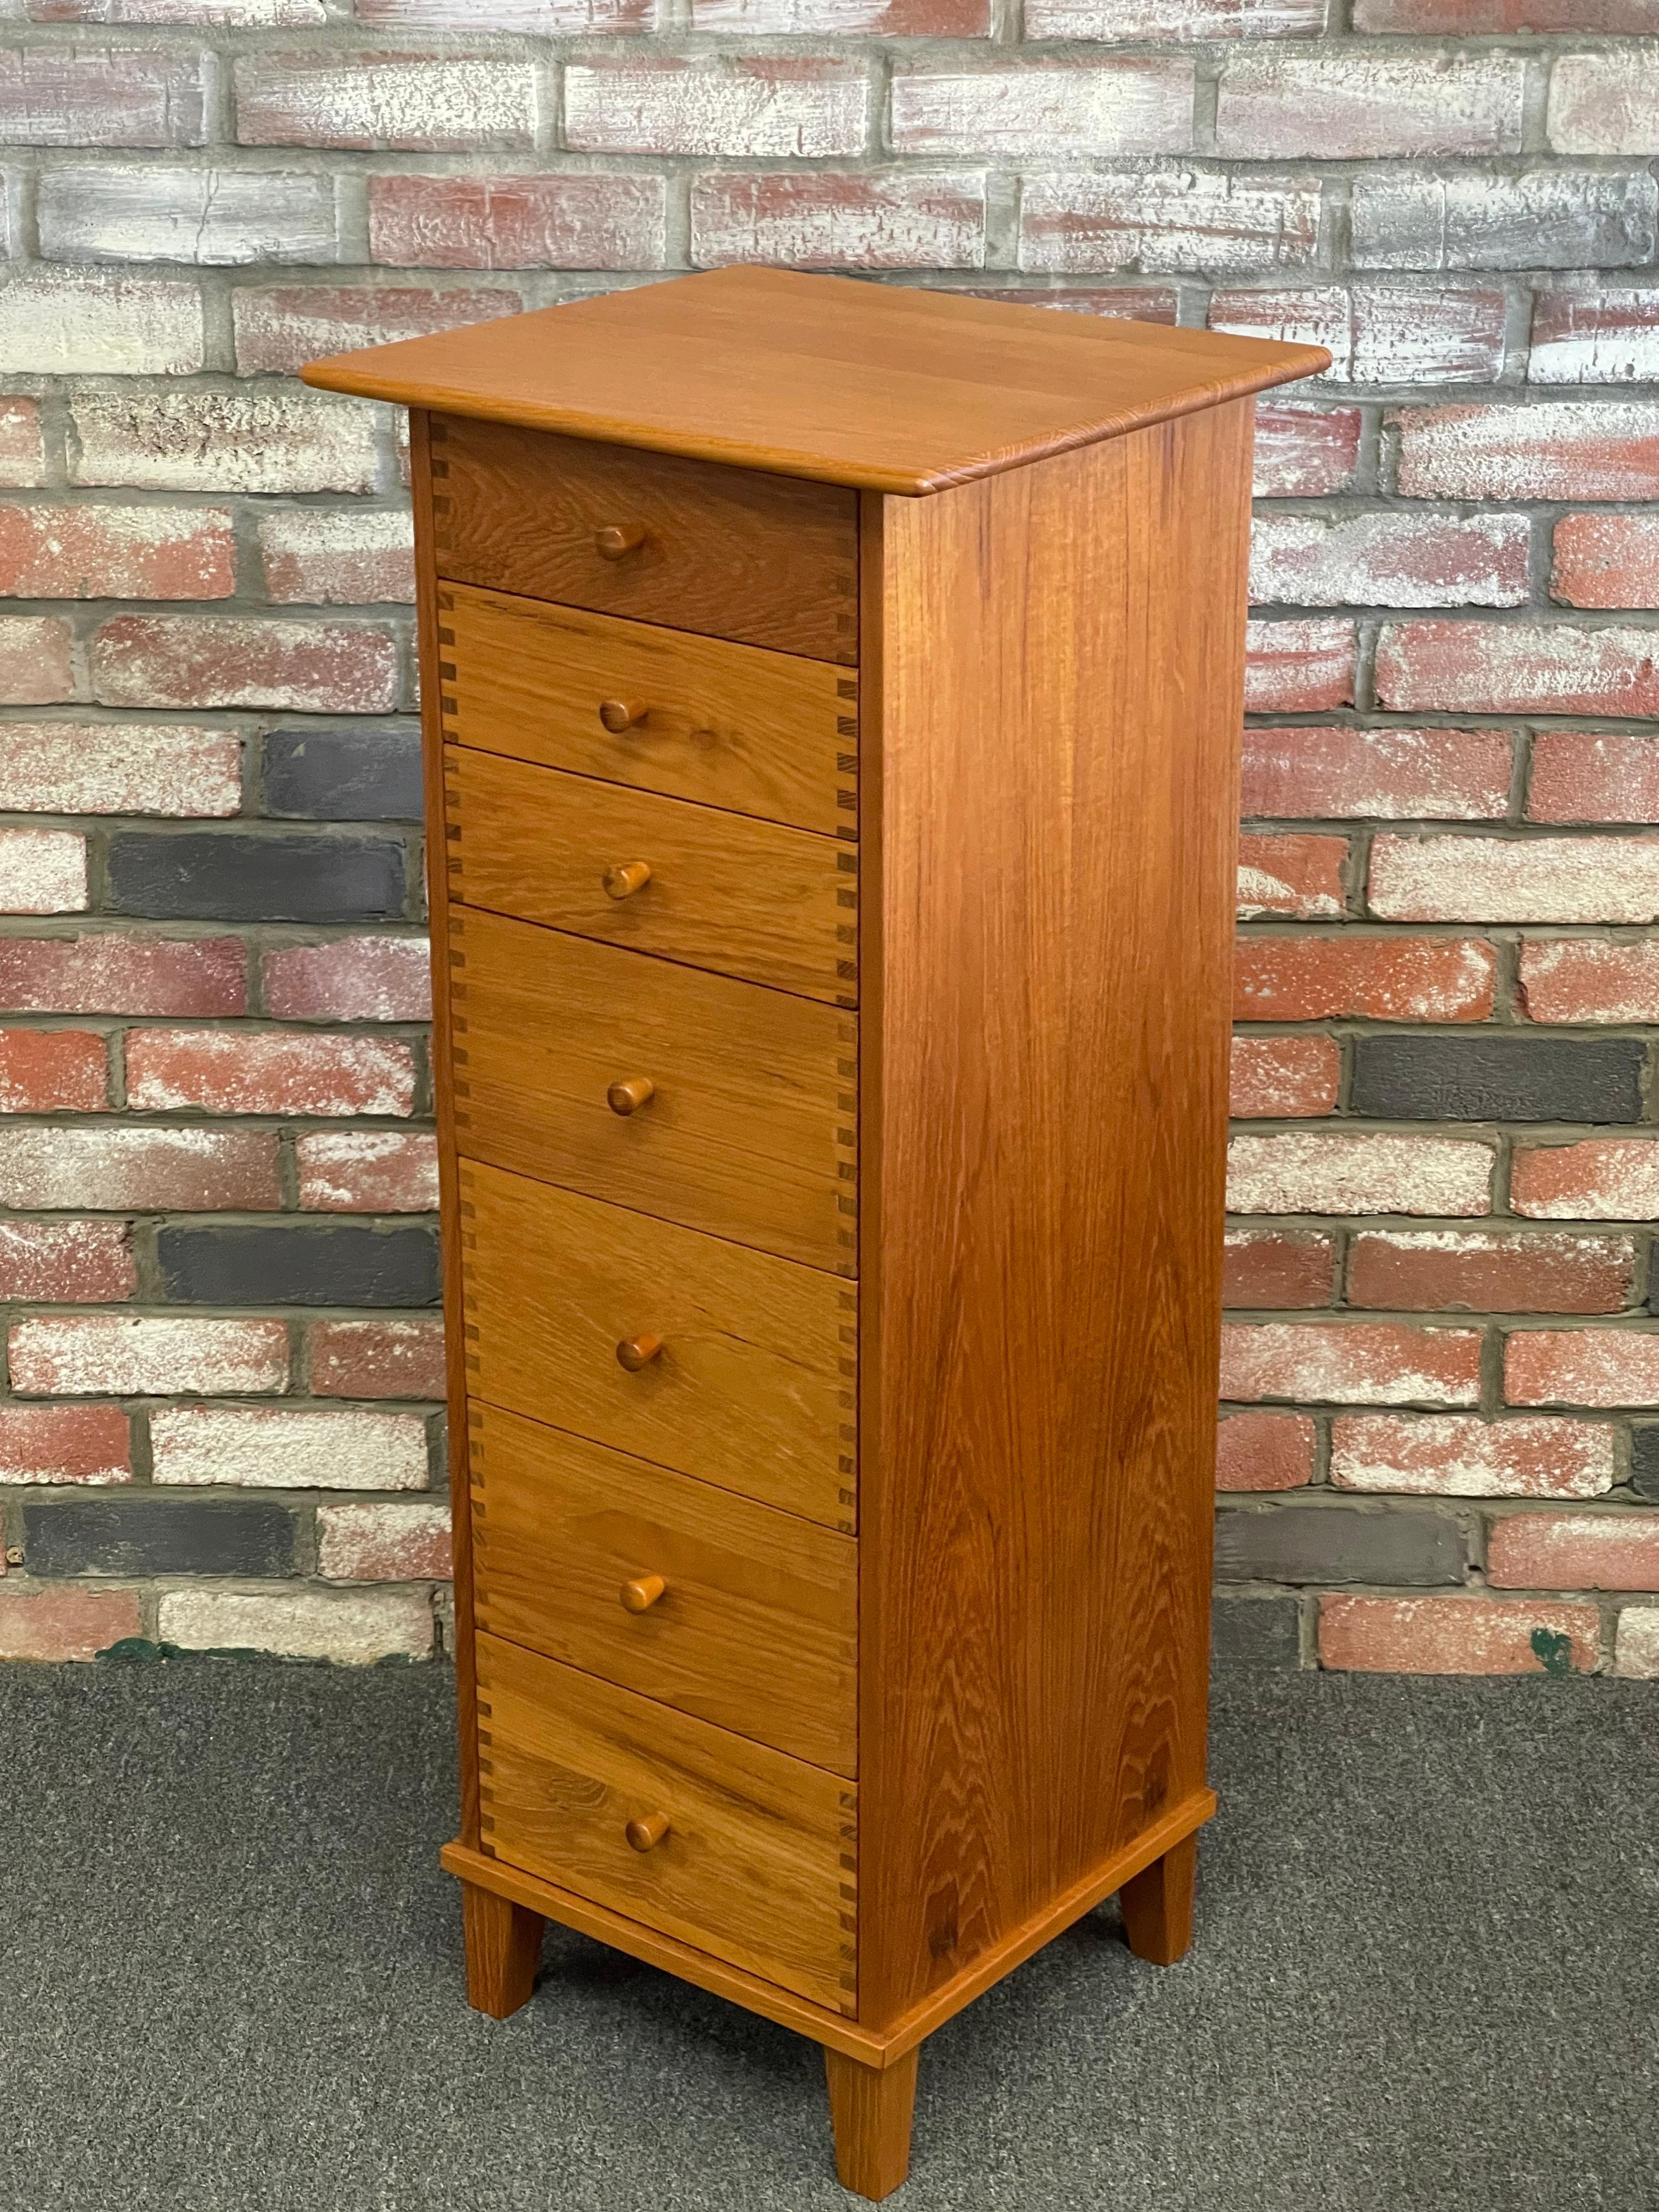 A gorgeous Danish modern seven-drawer teak lingerie chest by Aksel Kjersgaard, circa 1980s. The chest is exquisite; the quality is top notch with all solid wood dovetailed drawers and a finished back. The top has an overhang and beveled edge and the